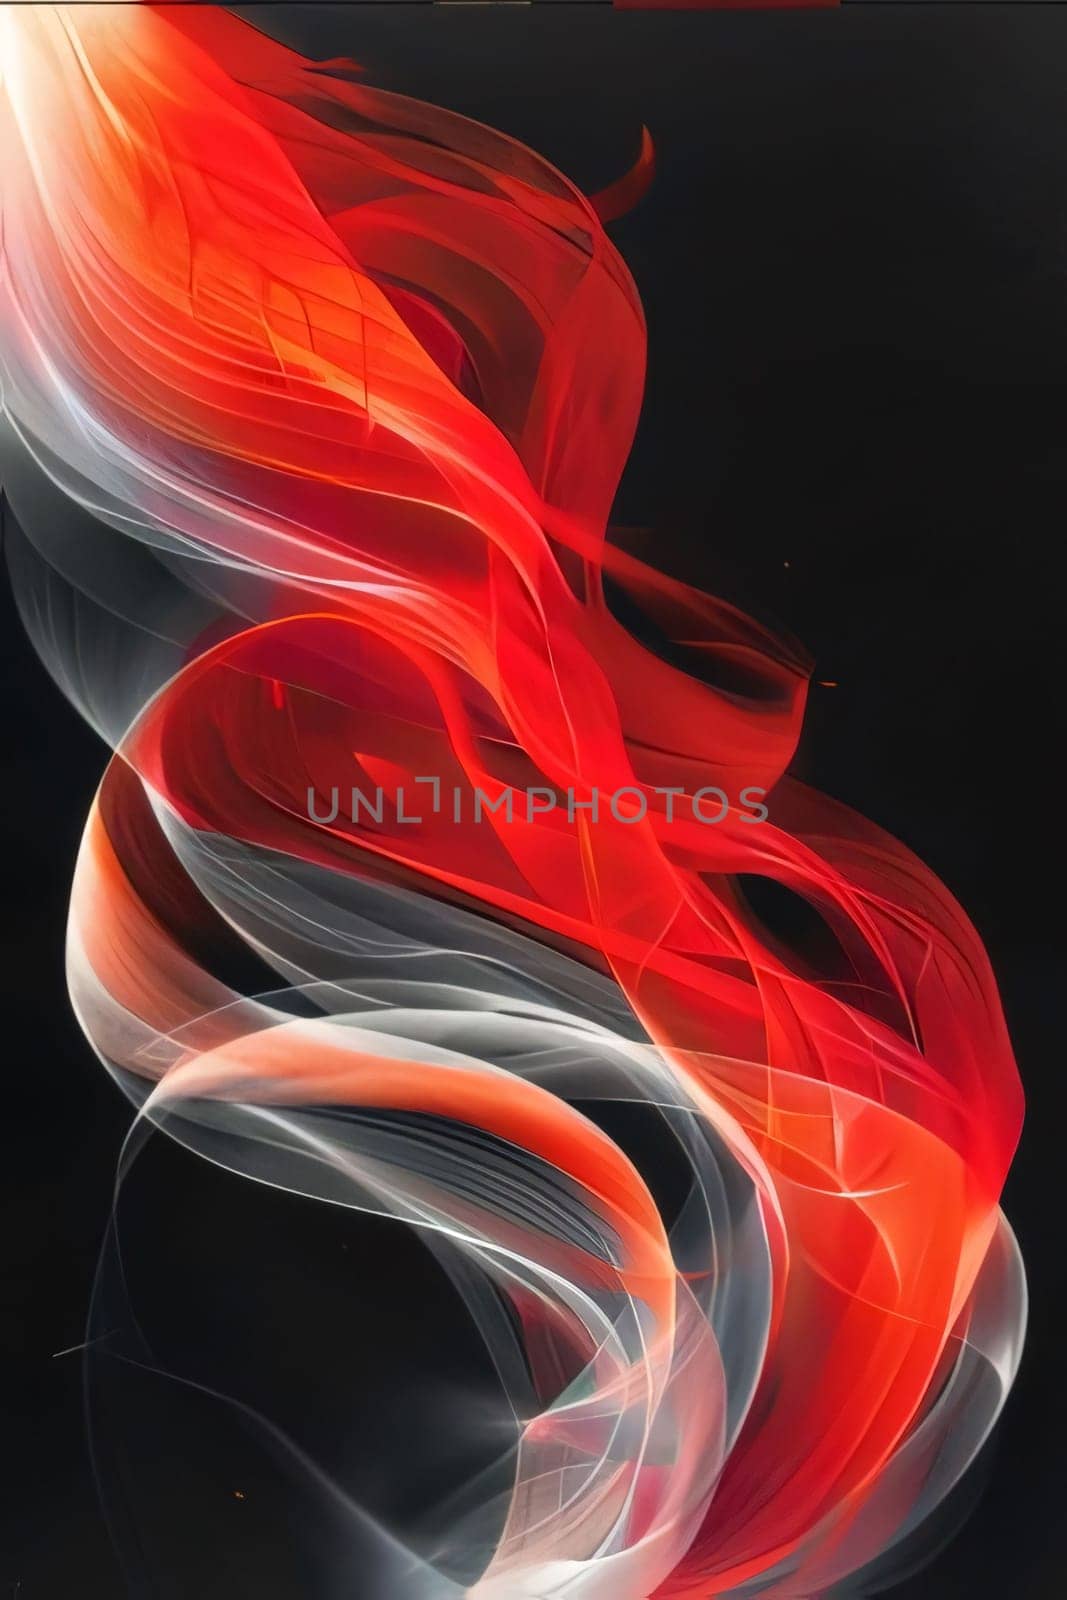 Abstract background design: abstract red and white smoke on a black background close-up